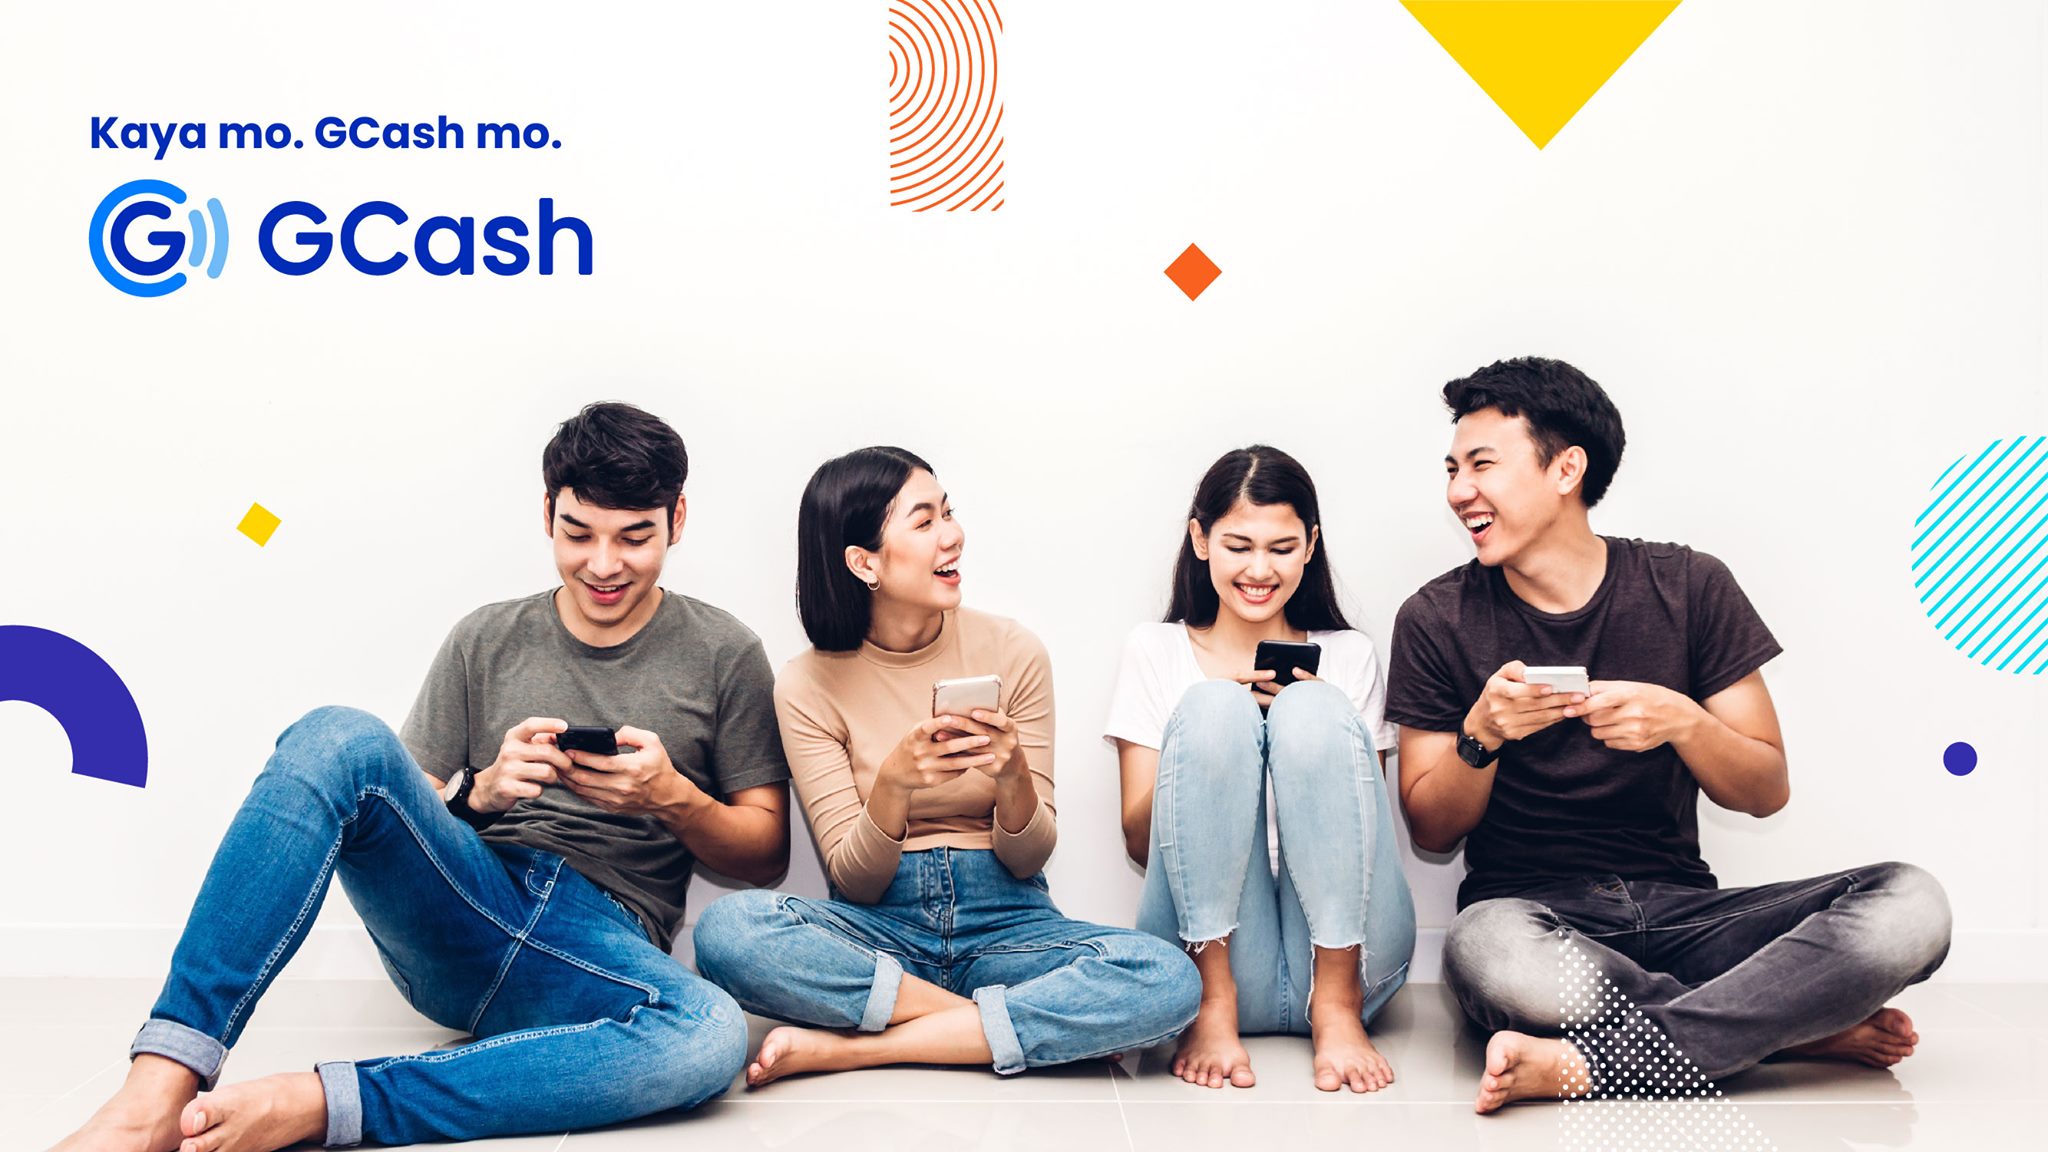 how to use gcash - faqs